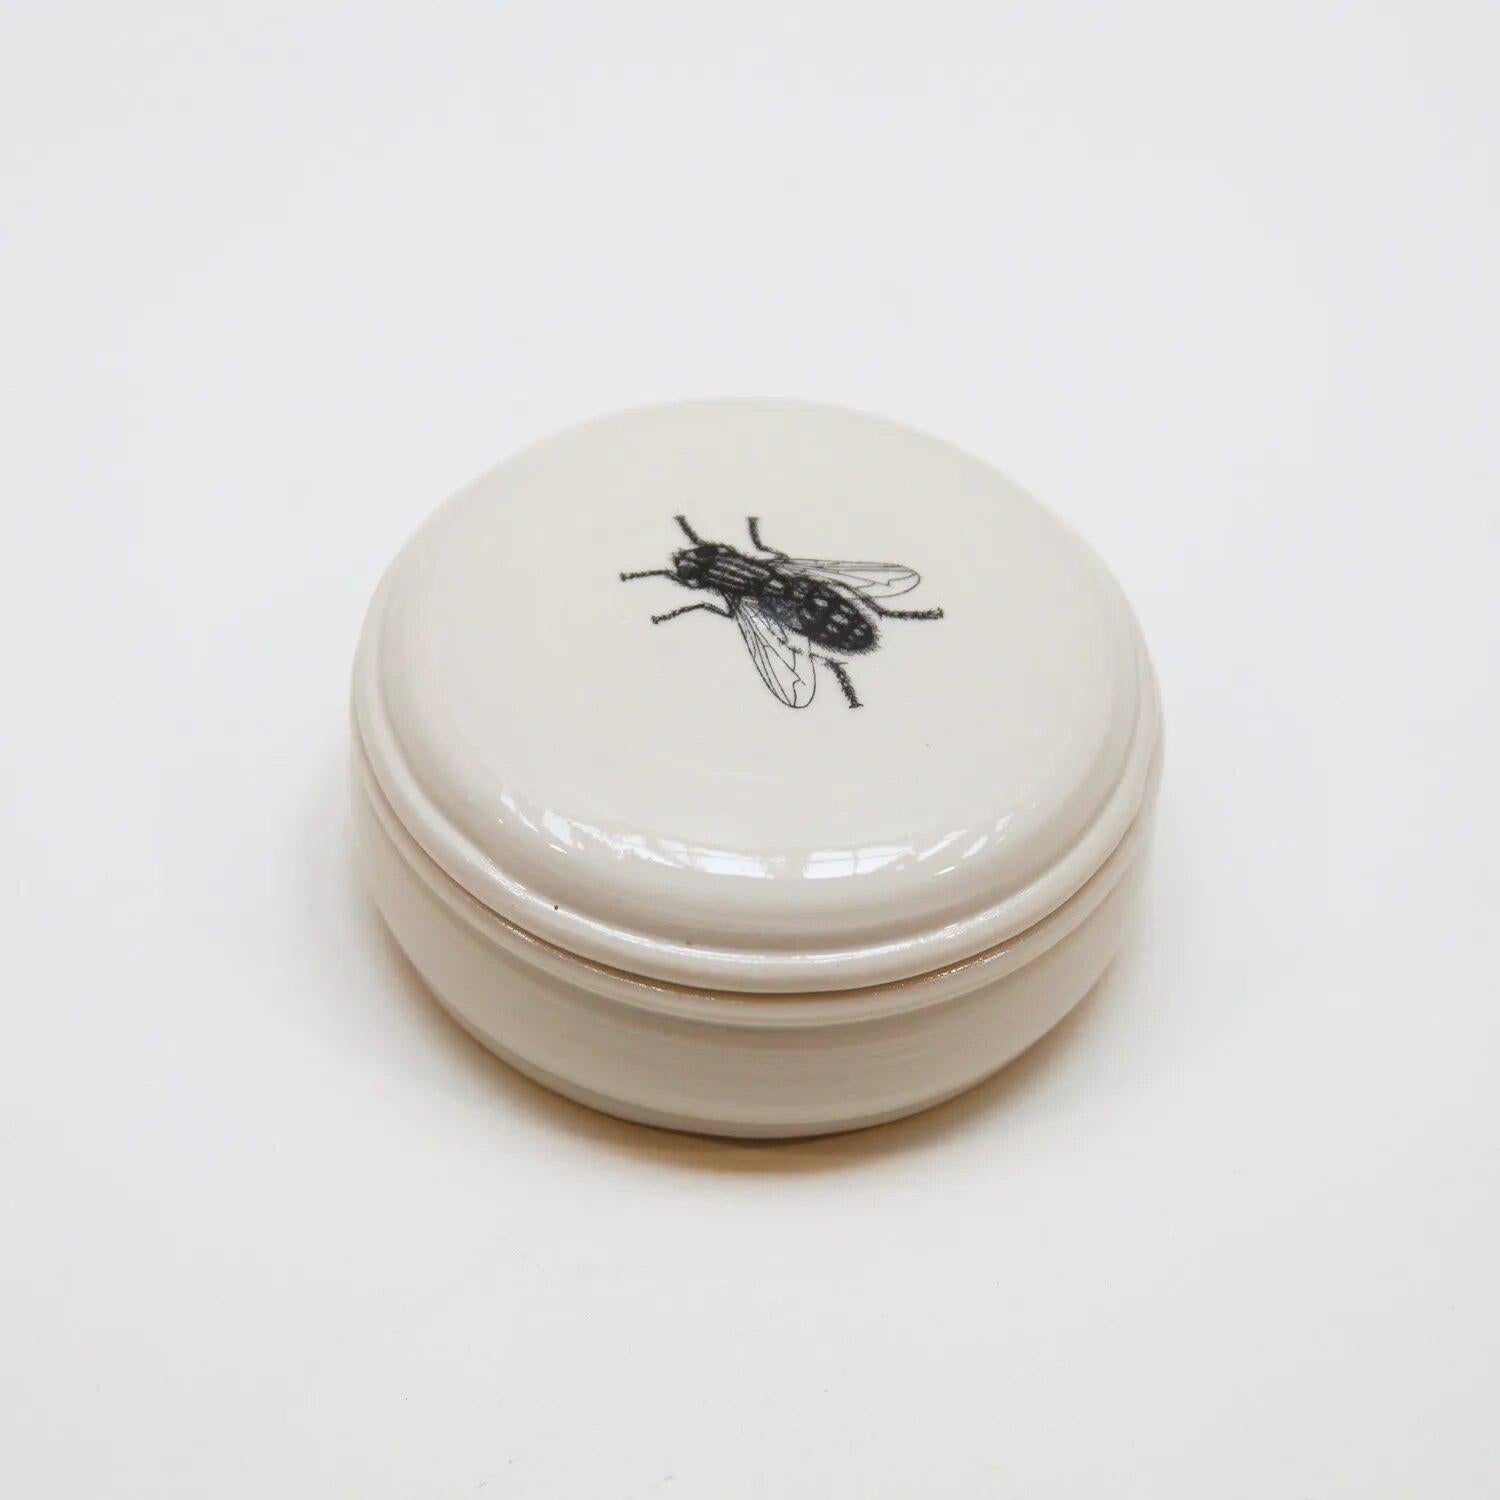 Ceramic Realist Flat Fly Lidded Container - Art by Ron Carlson